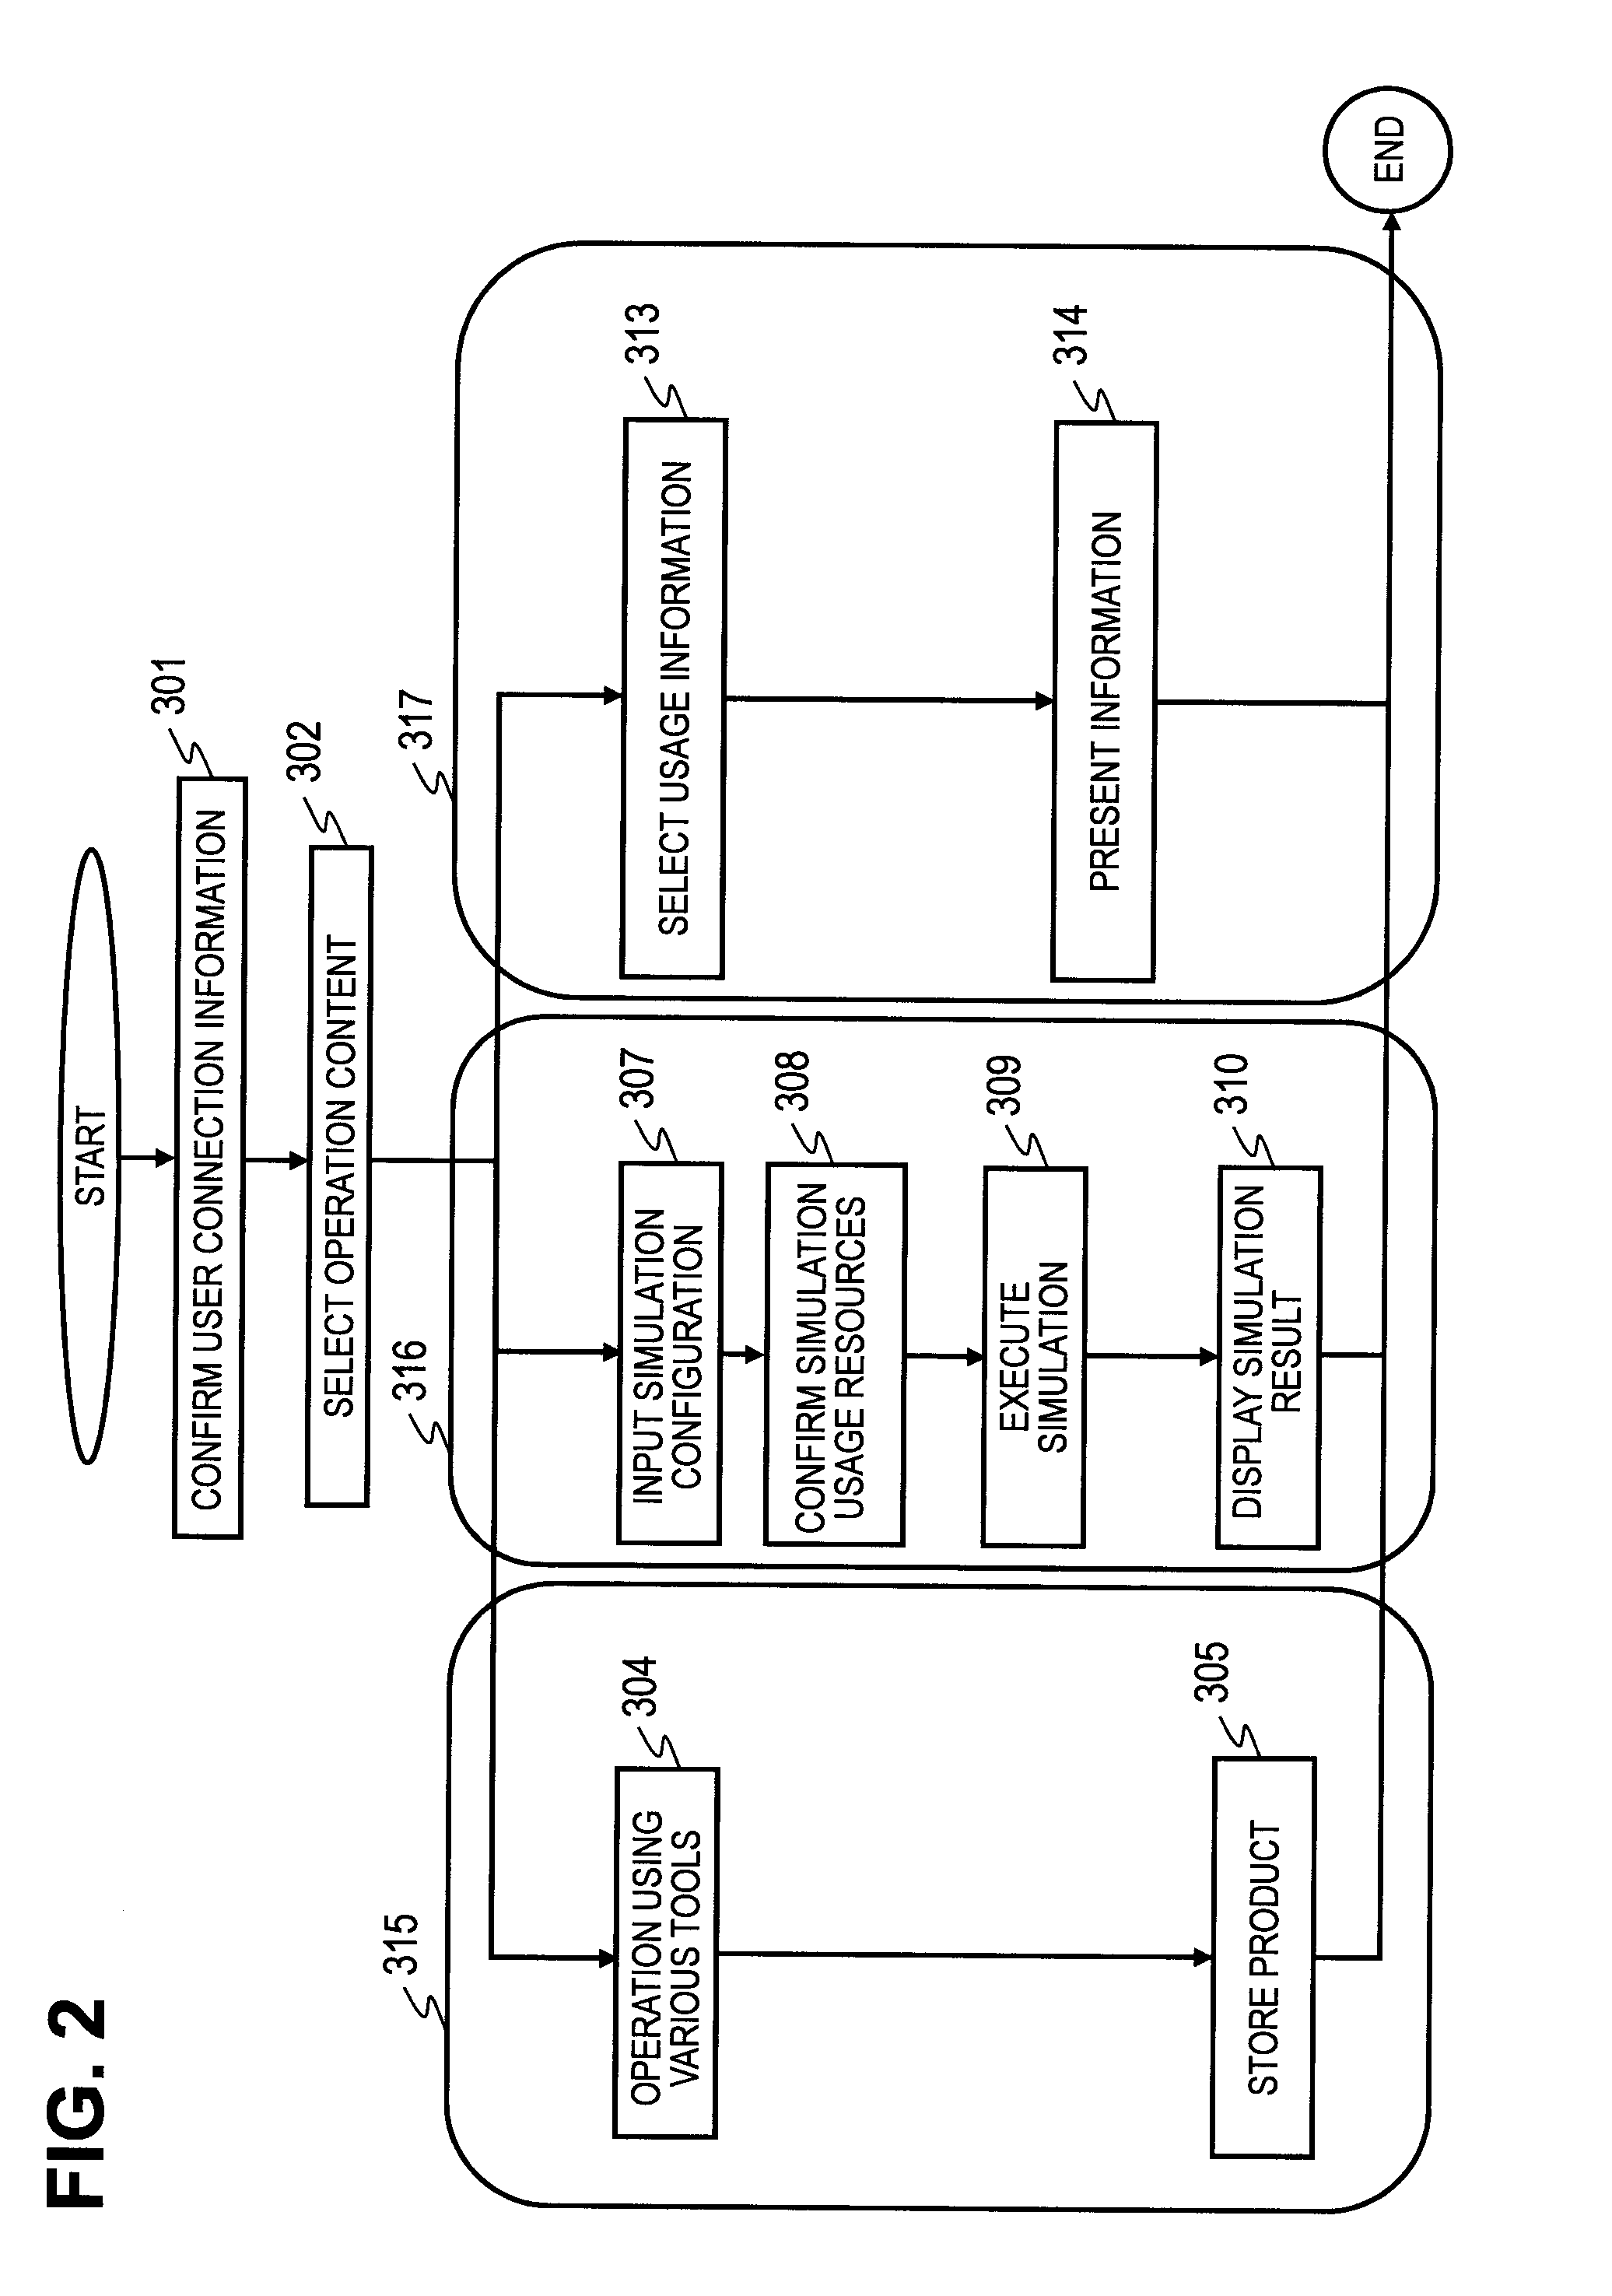 Computer System, Program, and Method for Assigning Computational Resource to be Used in Simulation